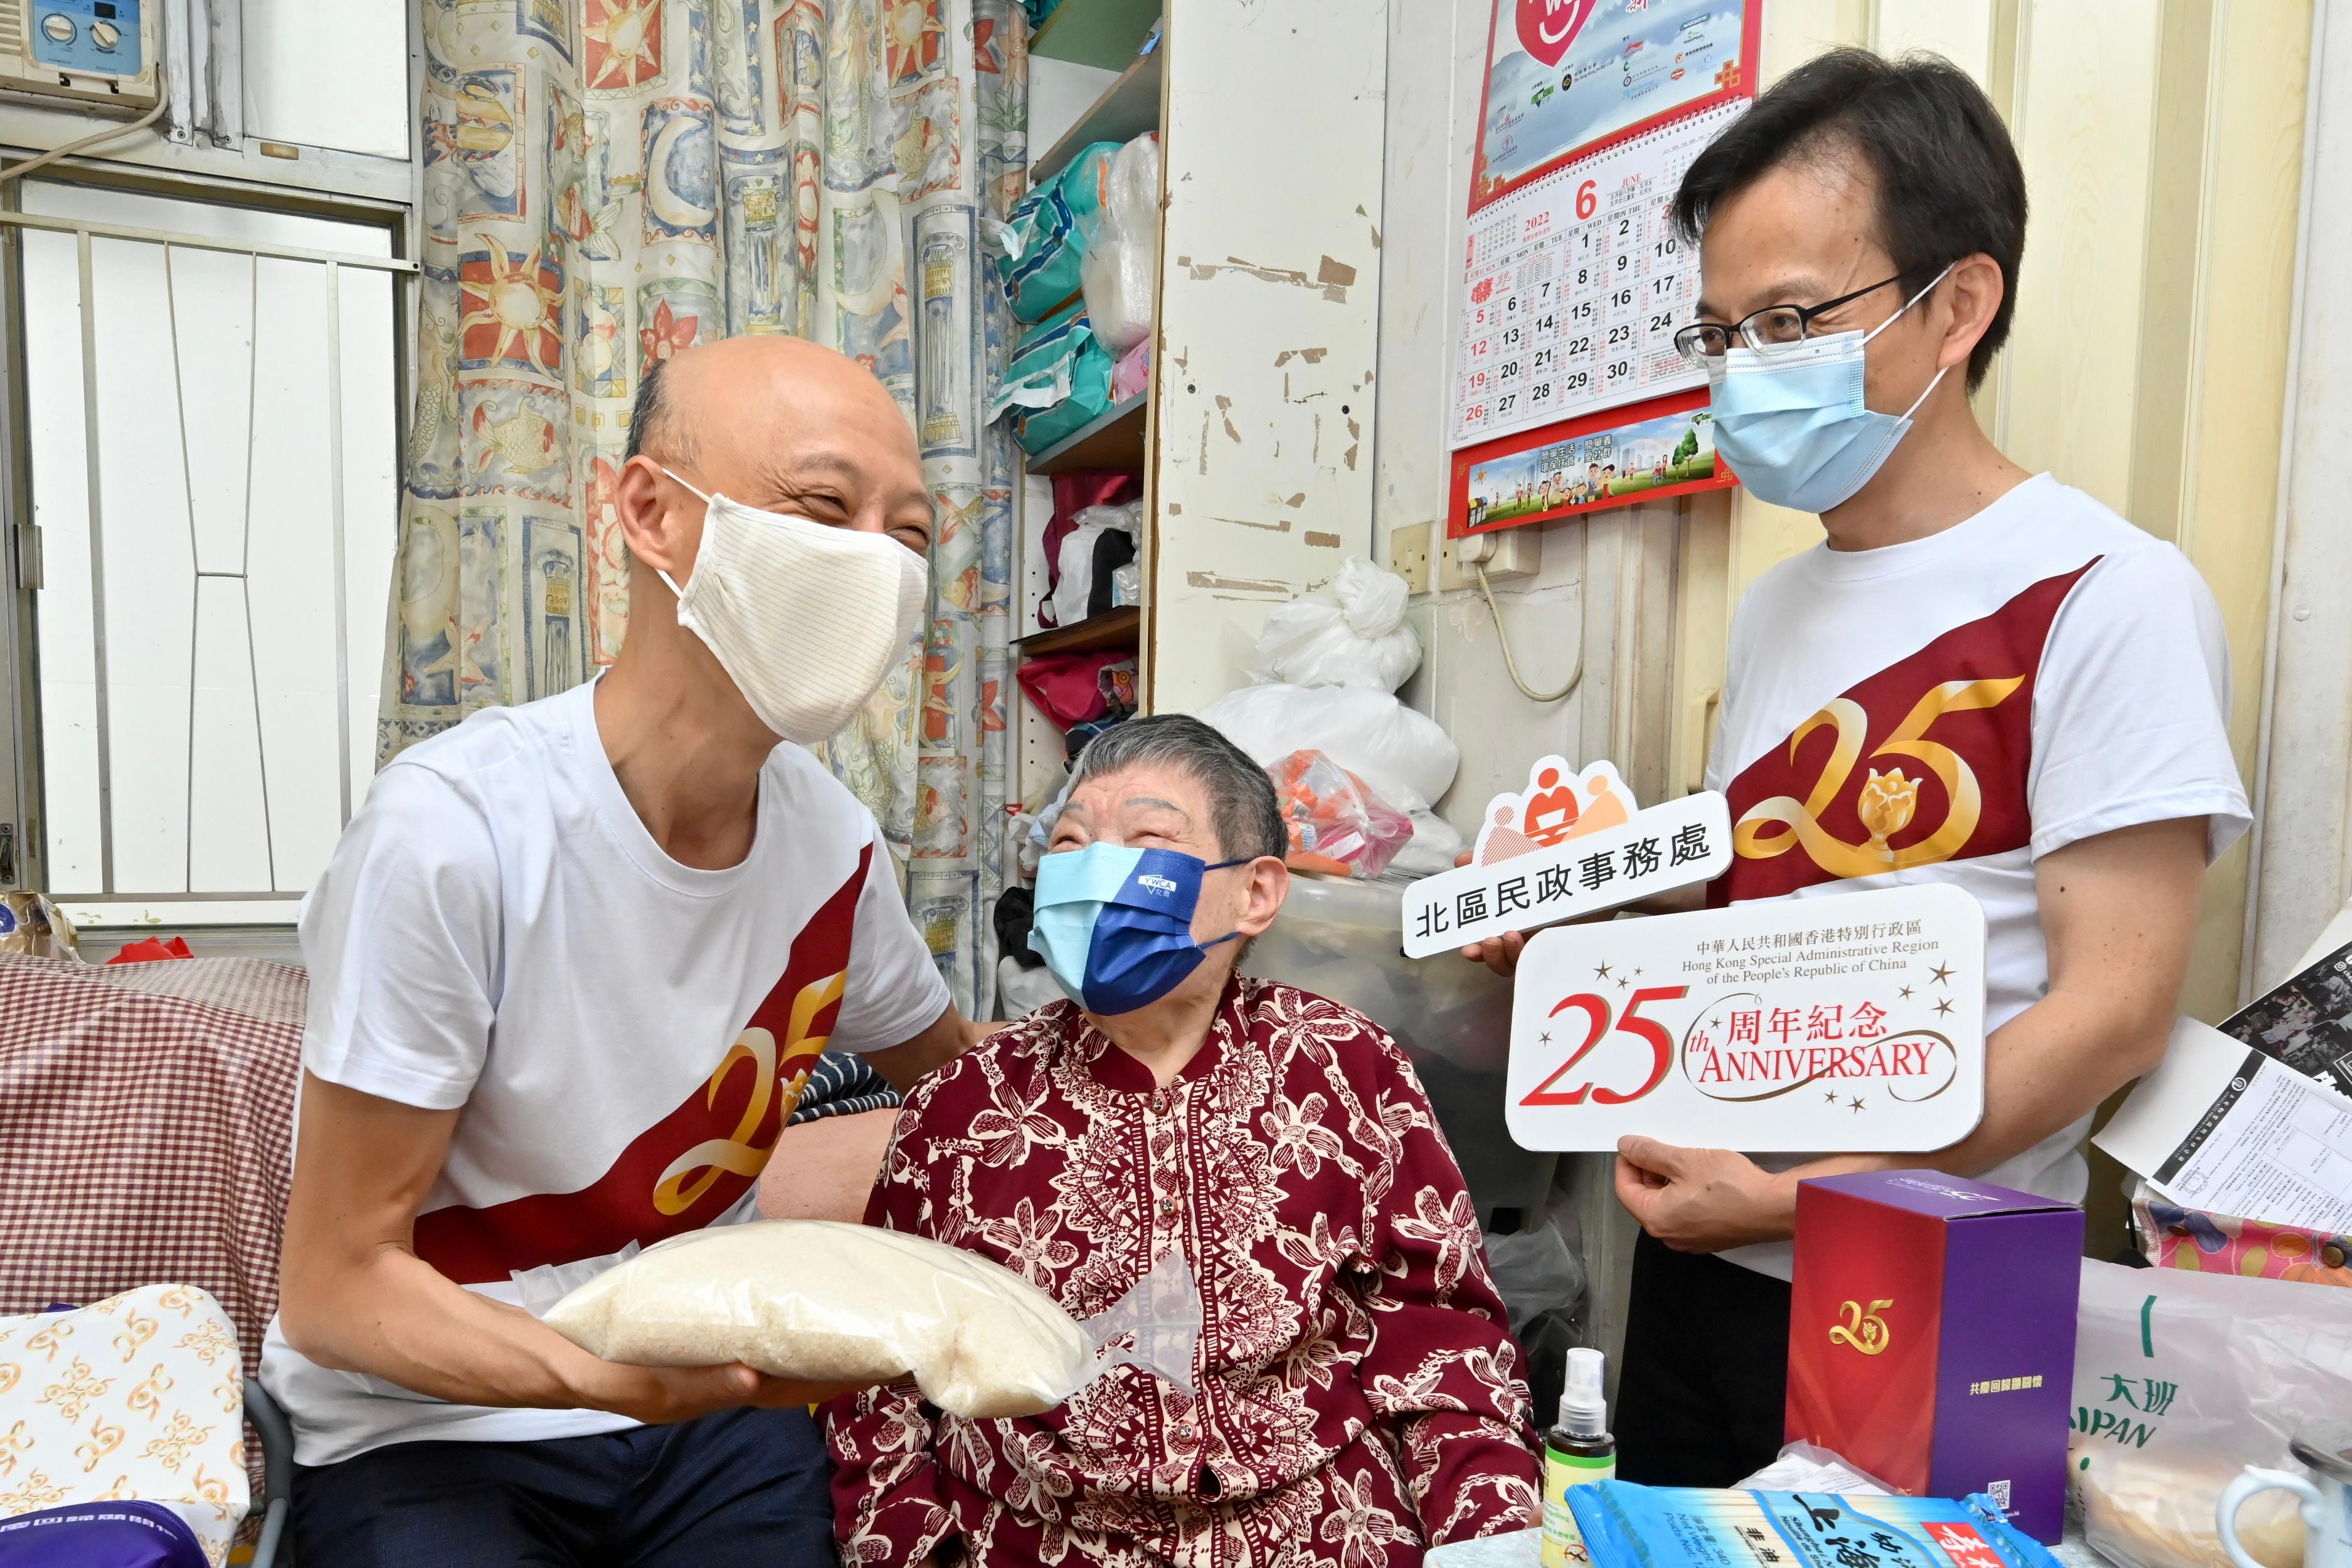 The Secretary for the Environment, Mr Wong Kam-sing (left), and the District Officer (North), Mr Chong Wing-wun (right), conducted home visits under the Celebrations for All project at Ka Fuk Estate in Fanling today (June 16). Picture shows Mr Wong distributing a gift pack to a resident to share the joy of the 25th anniversary of Hong Kong's return to the motherland. 
